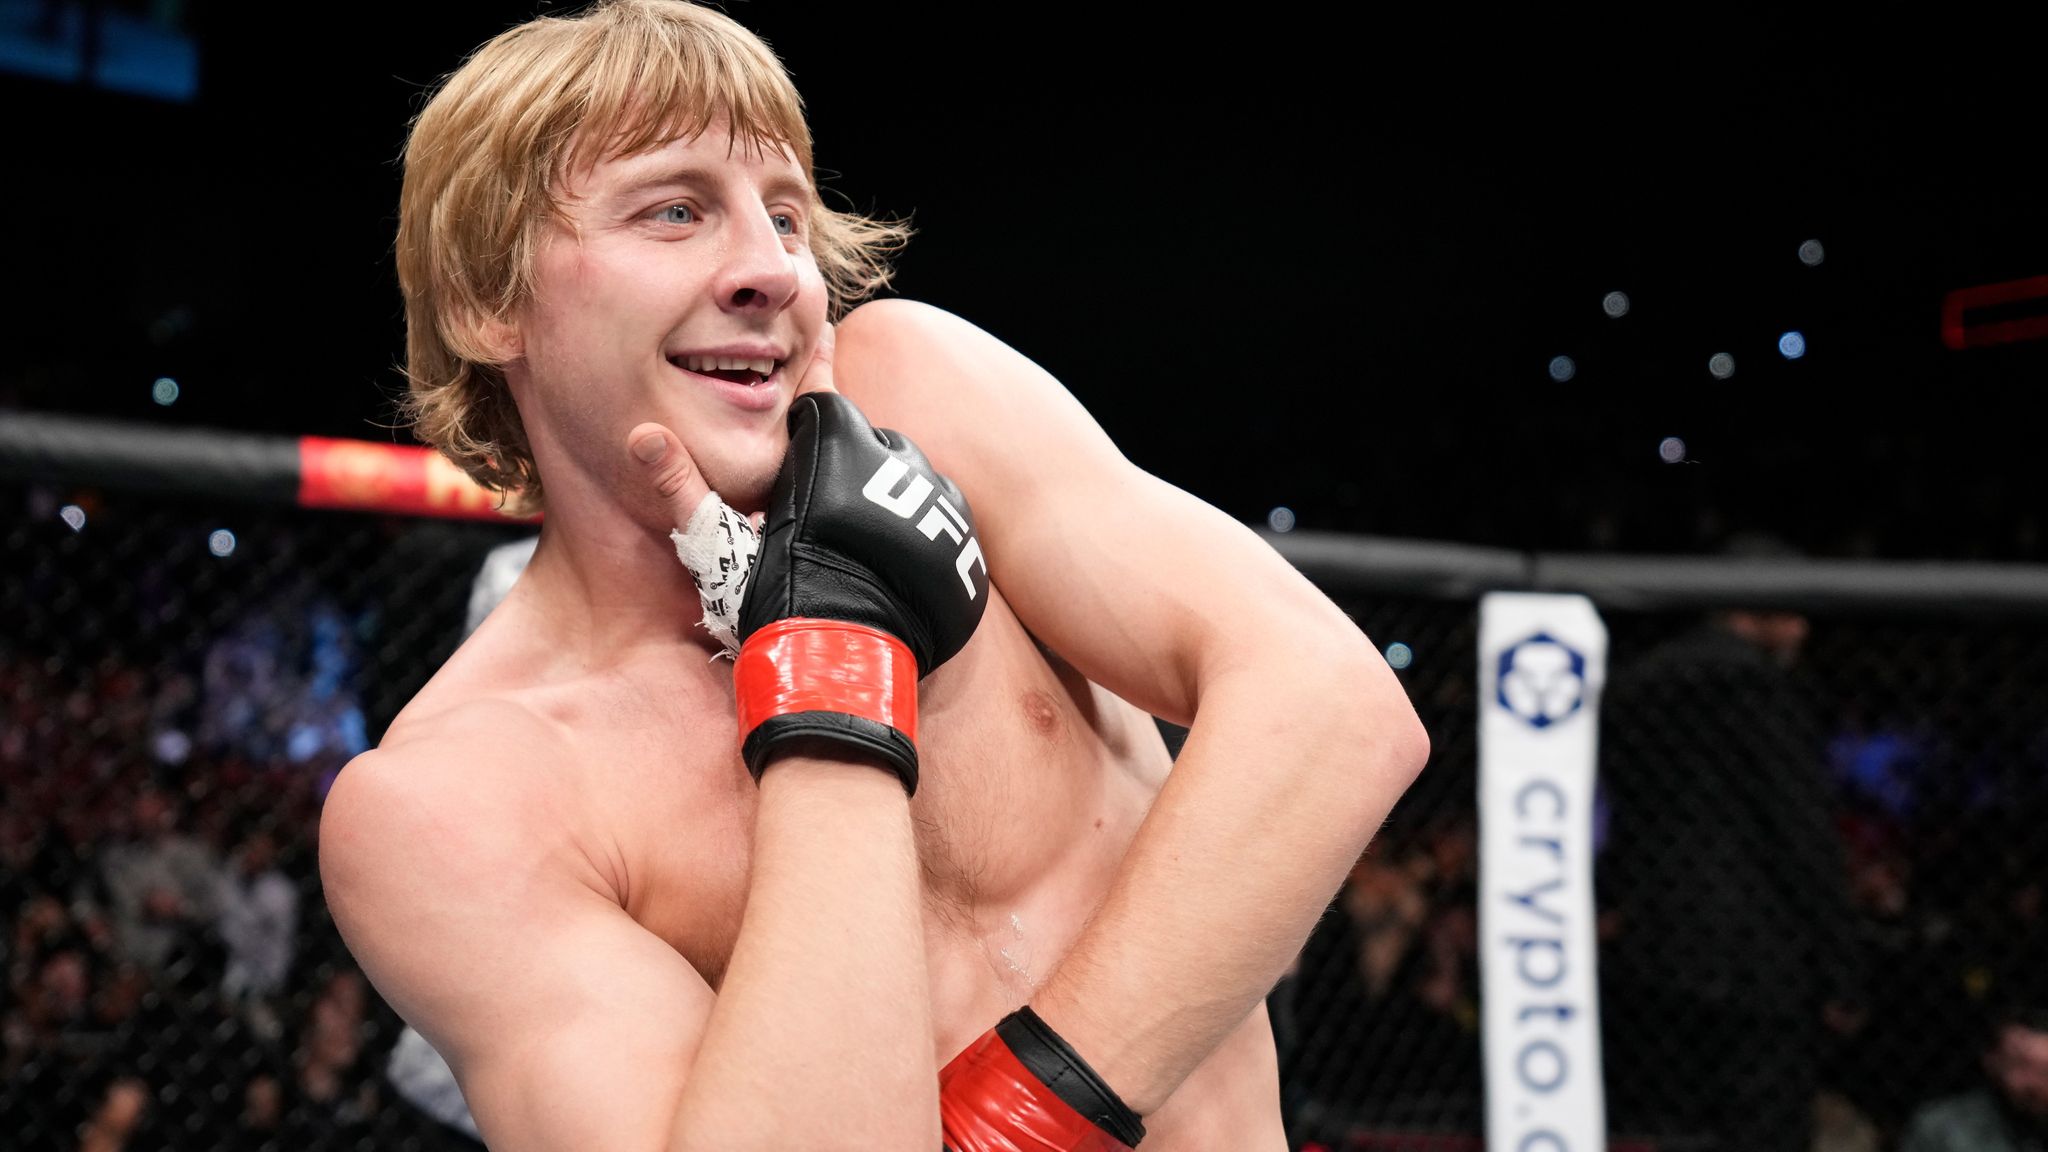 Paddy Pimblett: I'm Probably The Biggest Name In The Sport.